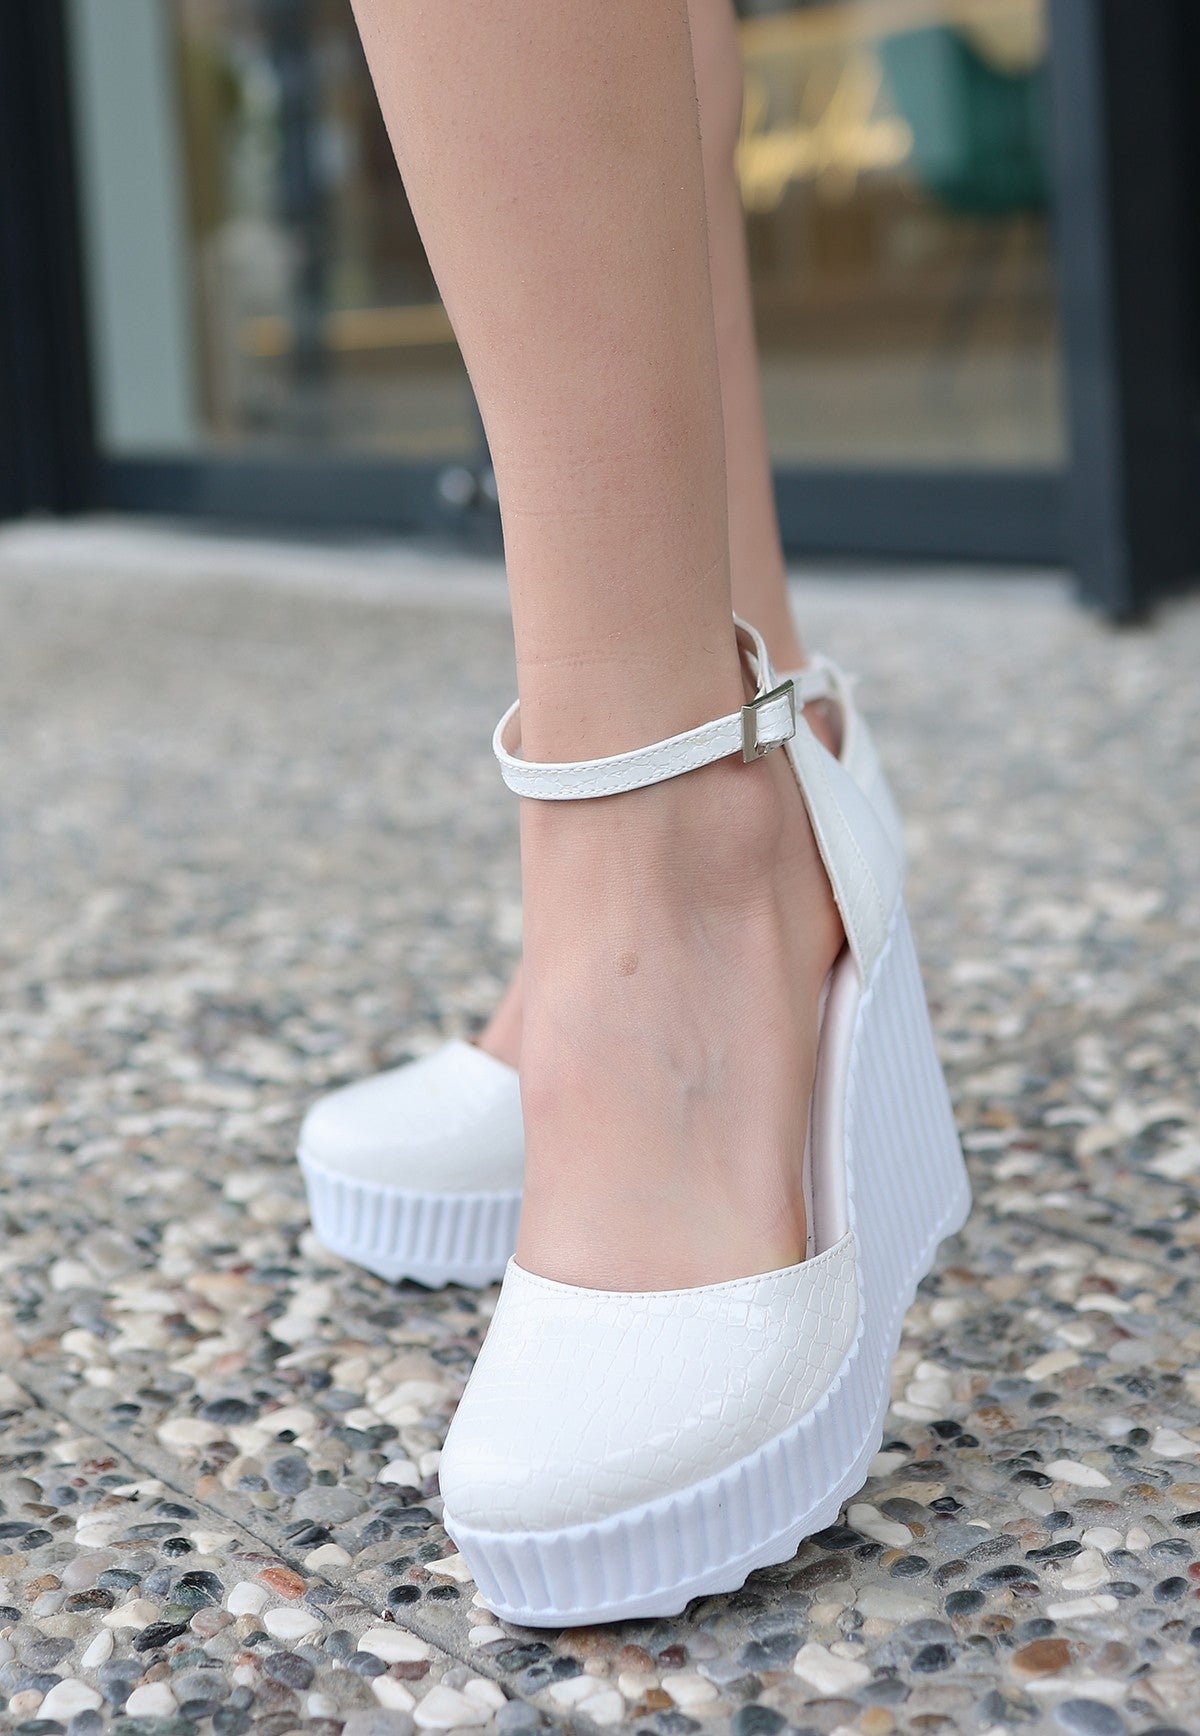 Women's White Patent Leather Wedge Heel Shoes - STREETMODE™